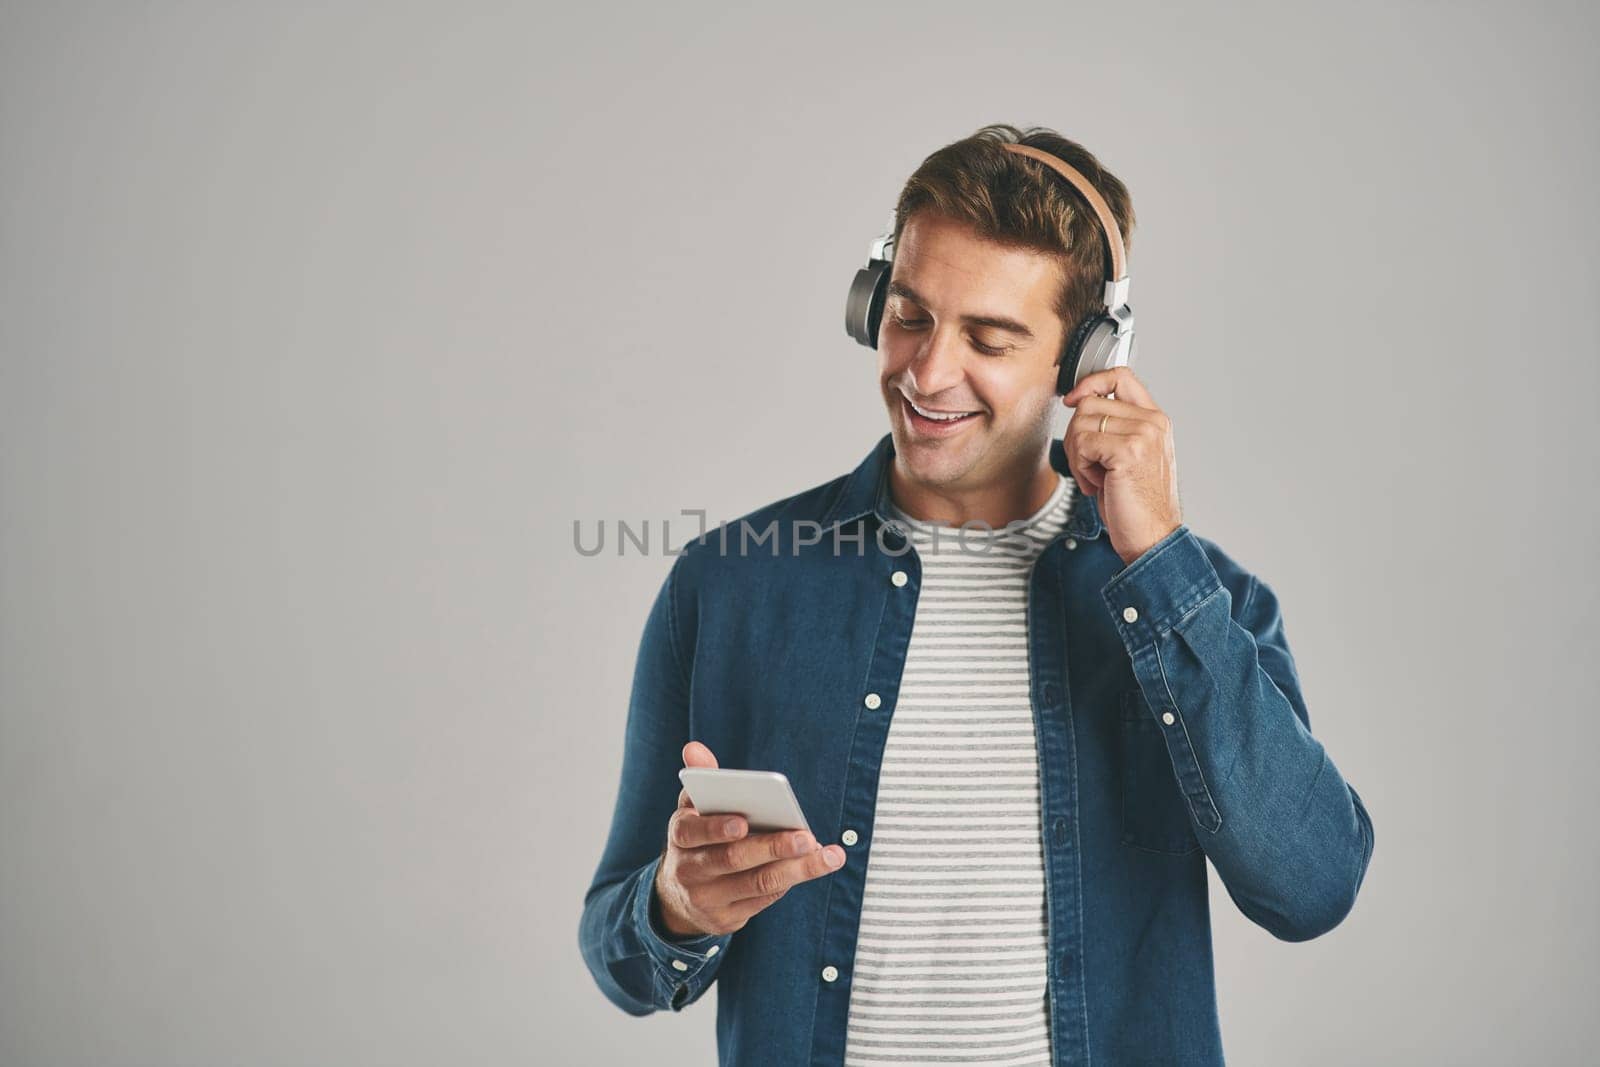 This music suits my taste. Studio shot of a young man using a cellphone while listening to music against a grey background